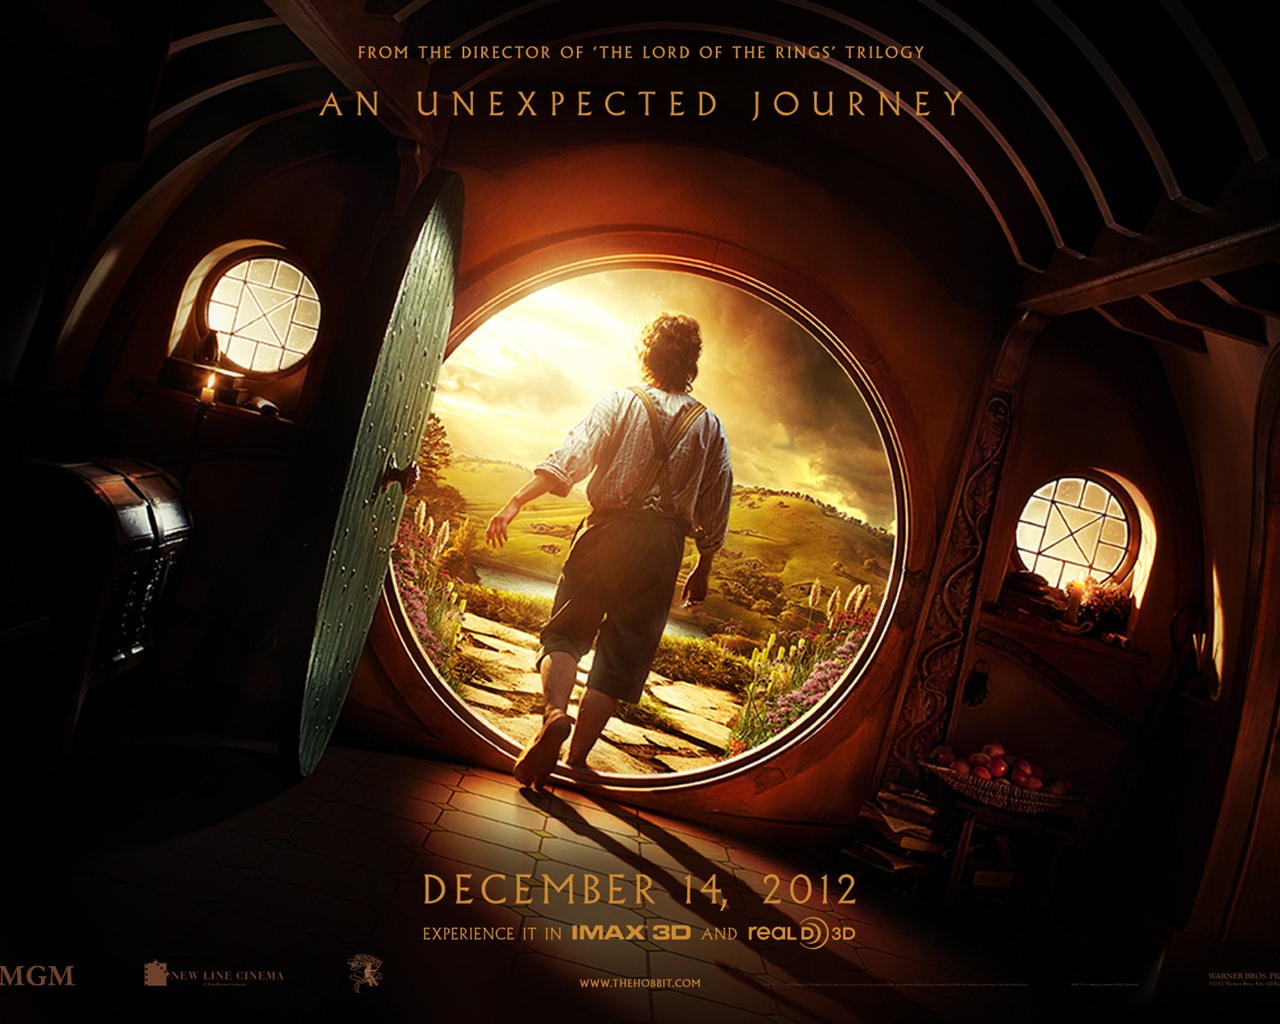 The Hobbit: An Unexpected Journey HD Wallpapers #15 - 1280x1024